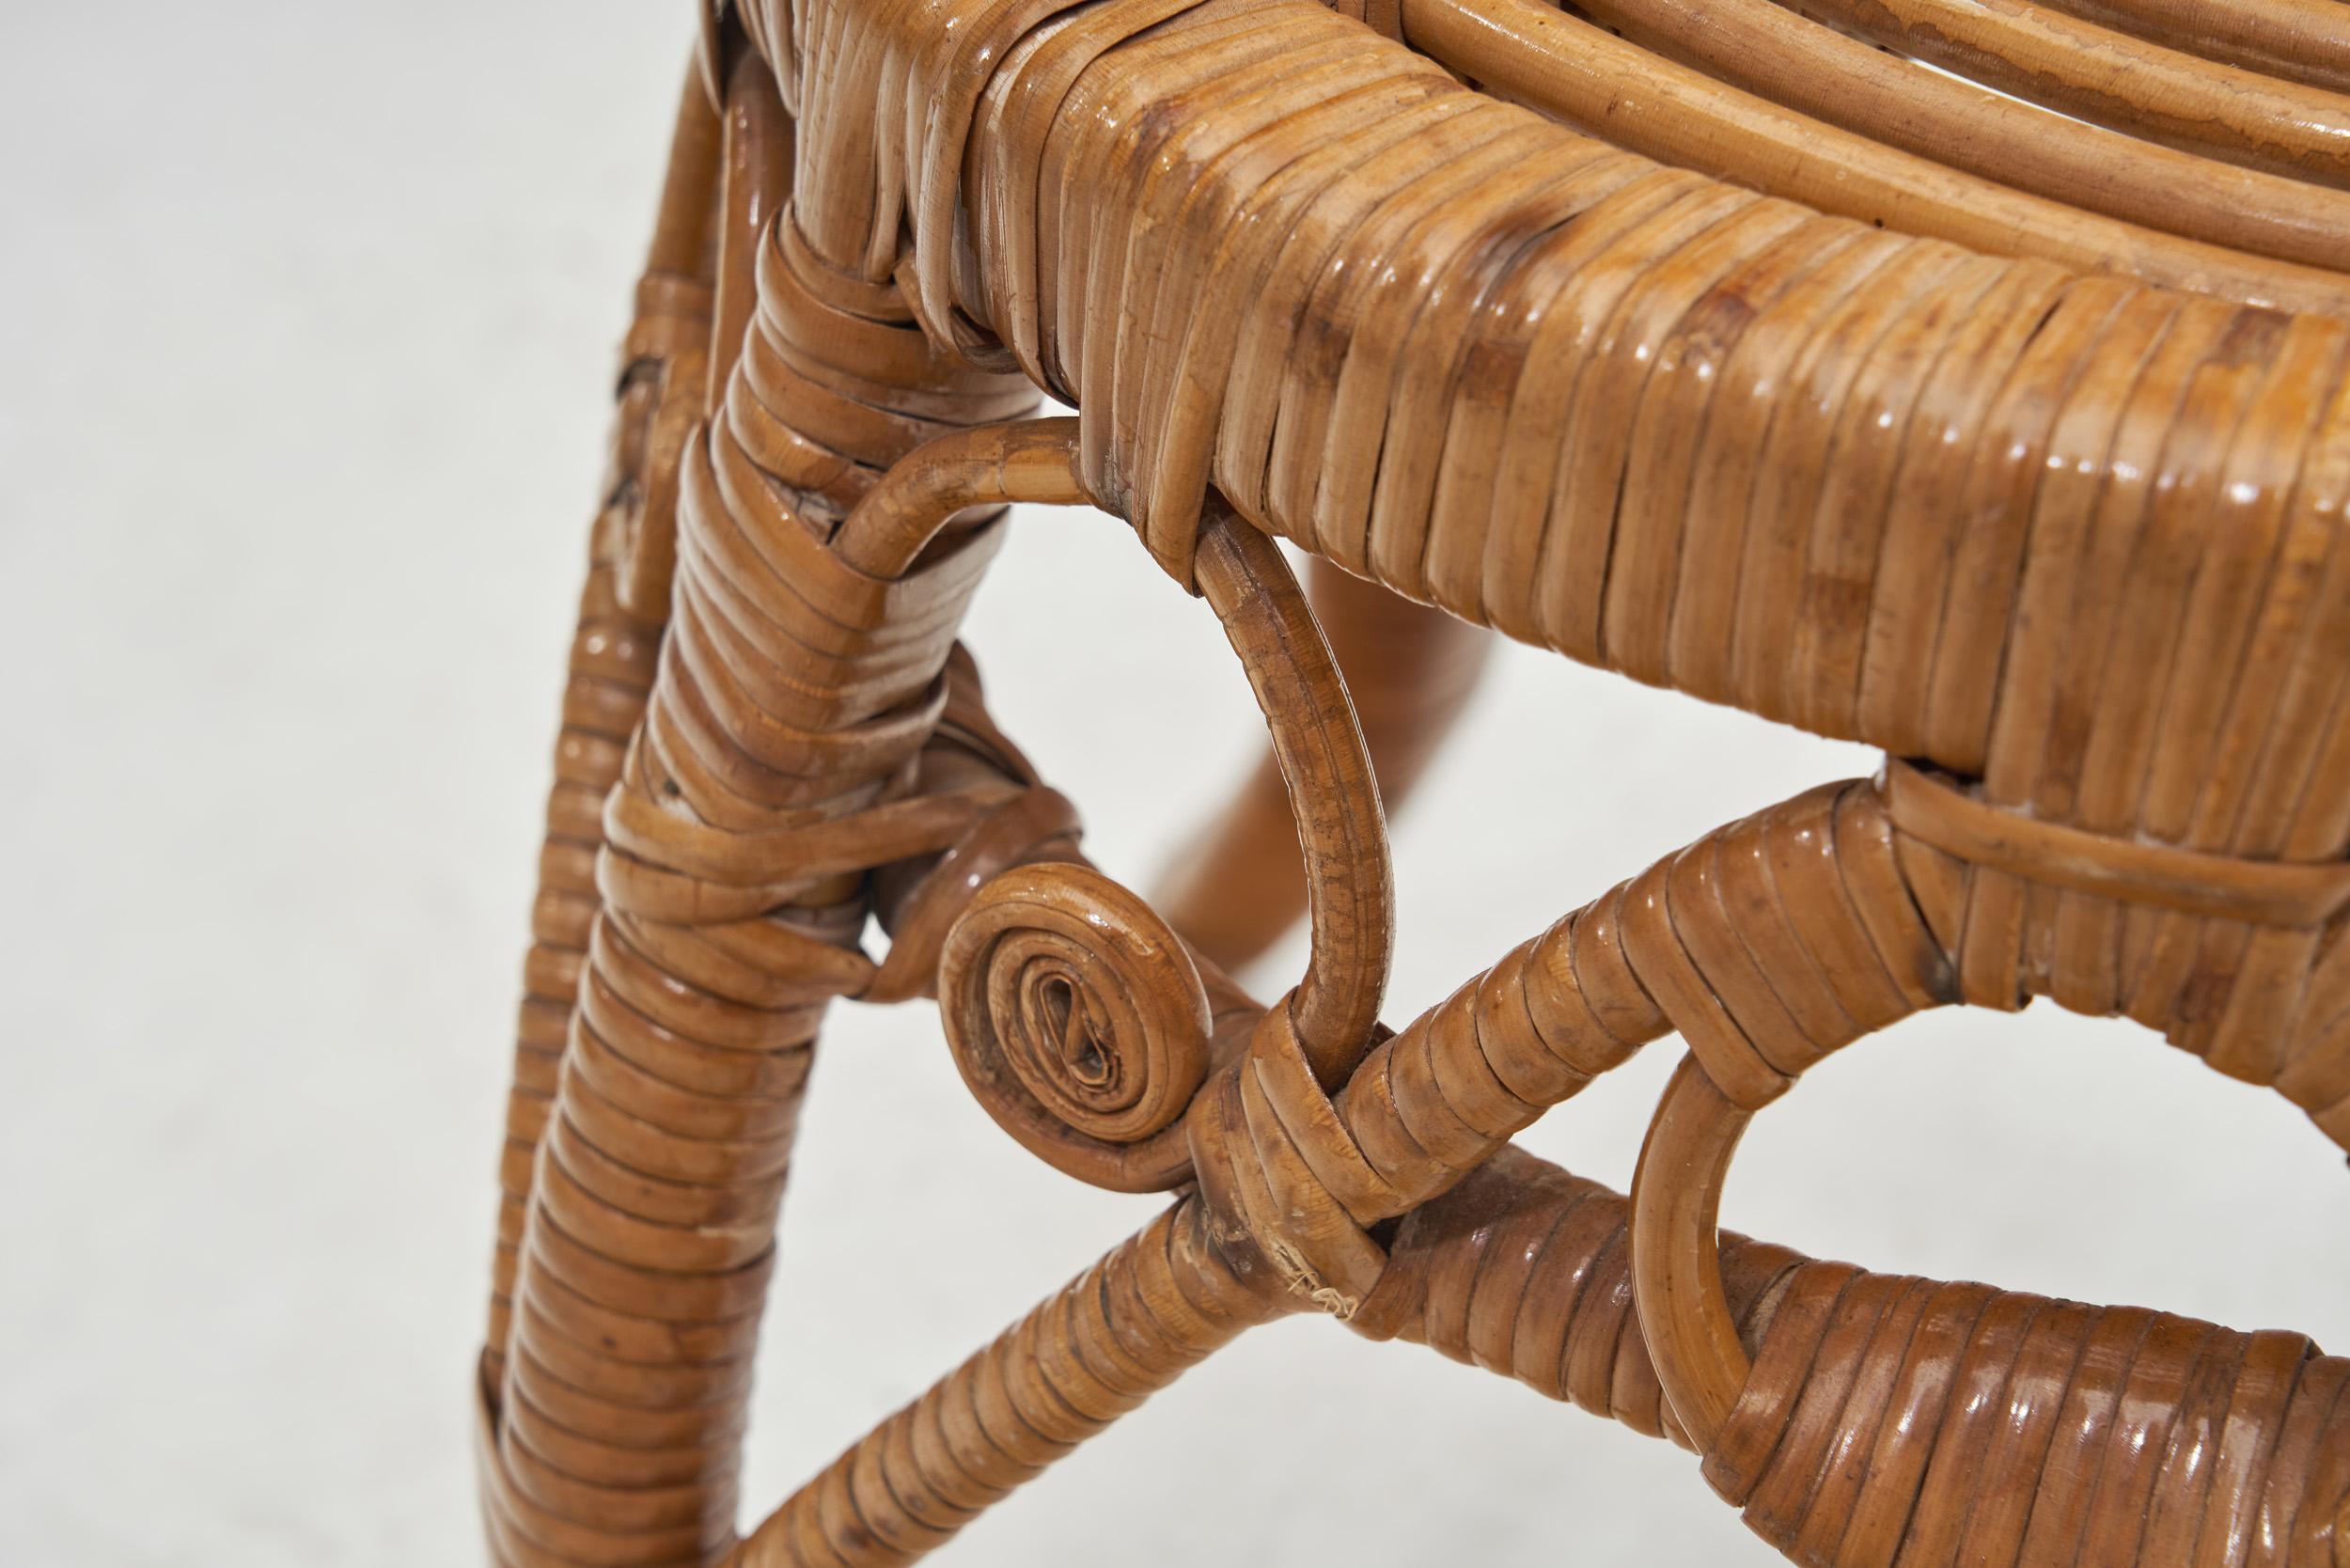 Woven Rattan Stool, Europe Early 20th Century For Sale 9